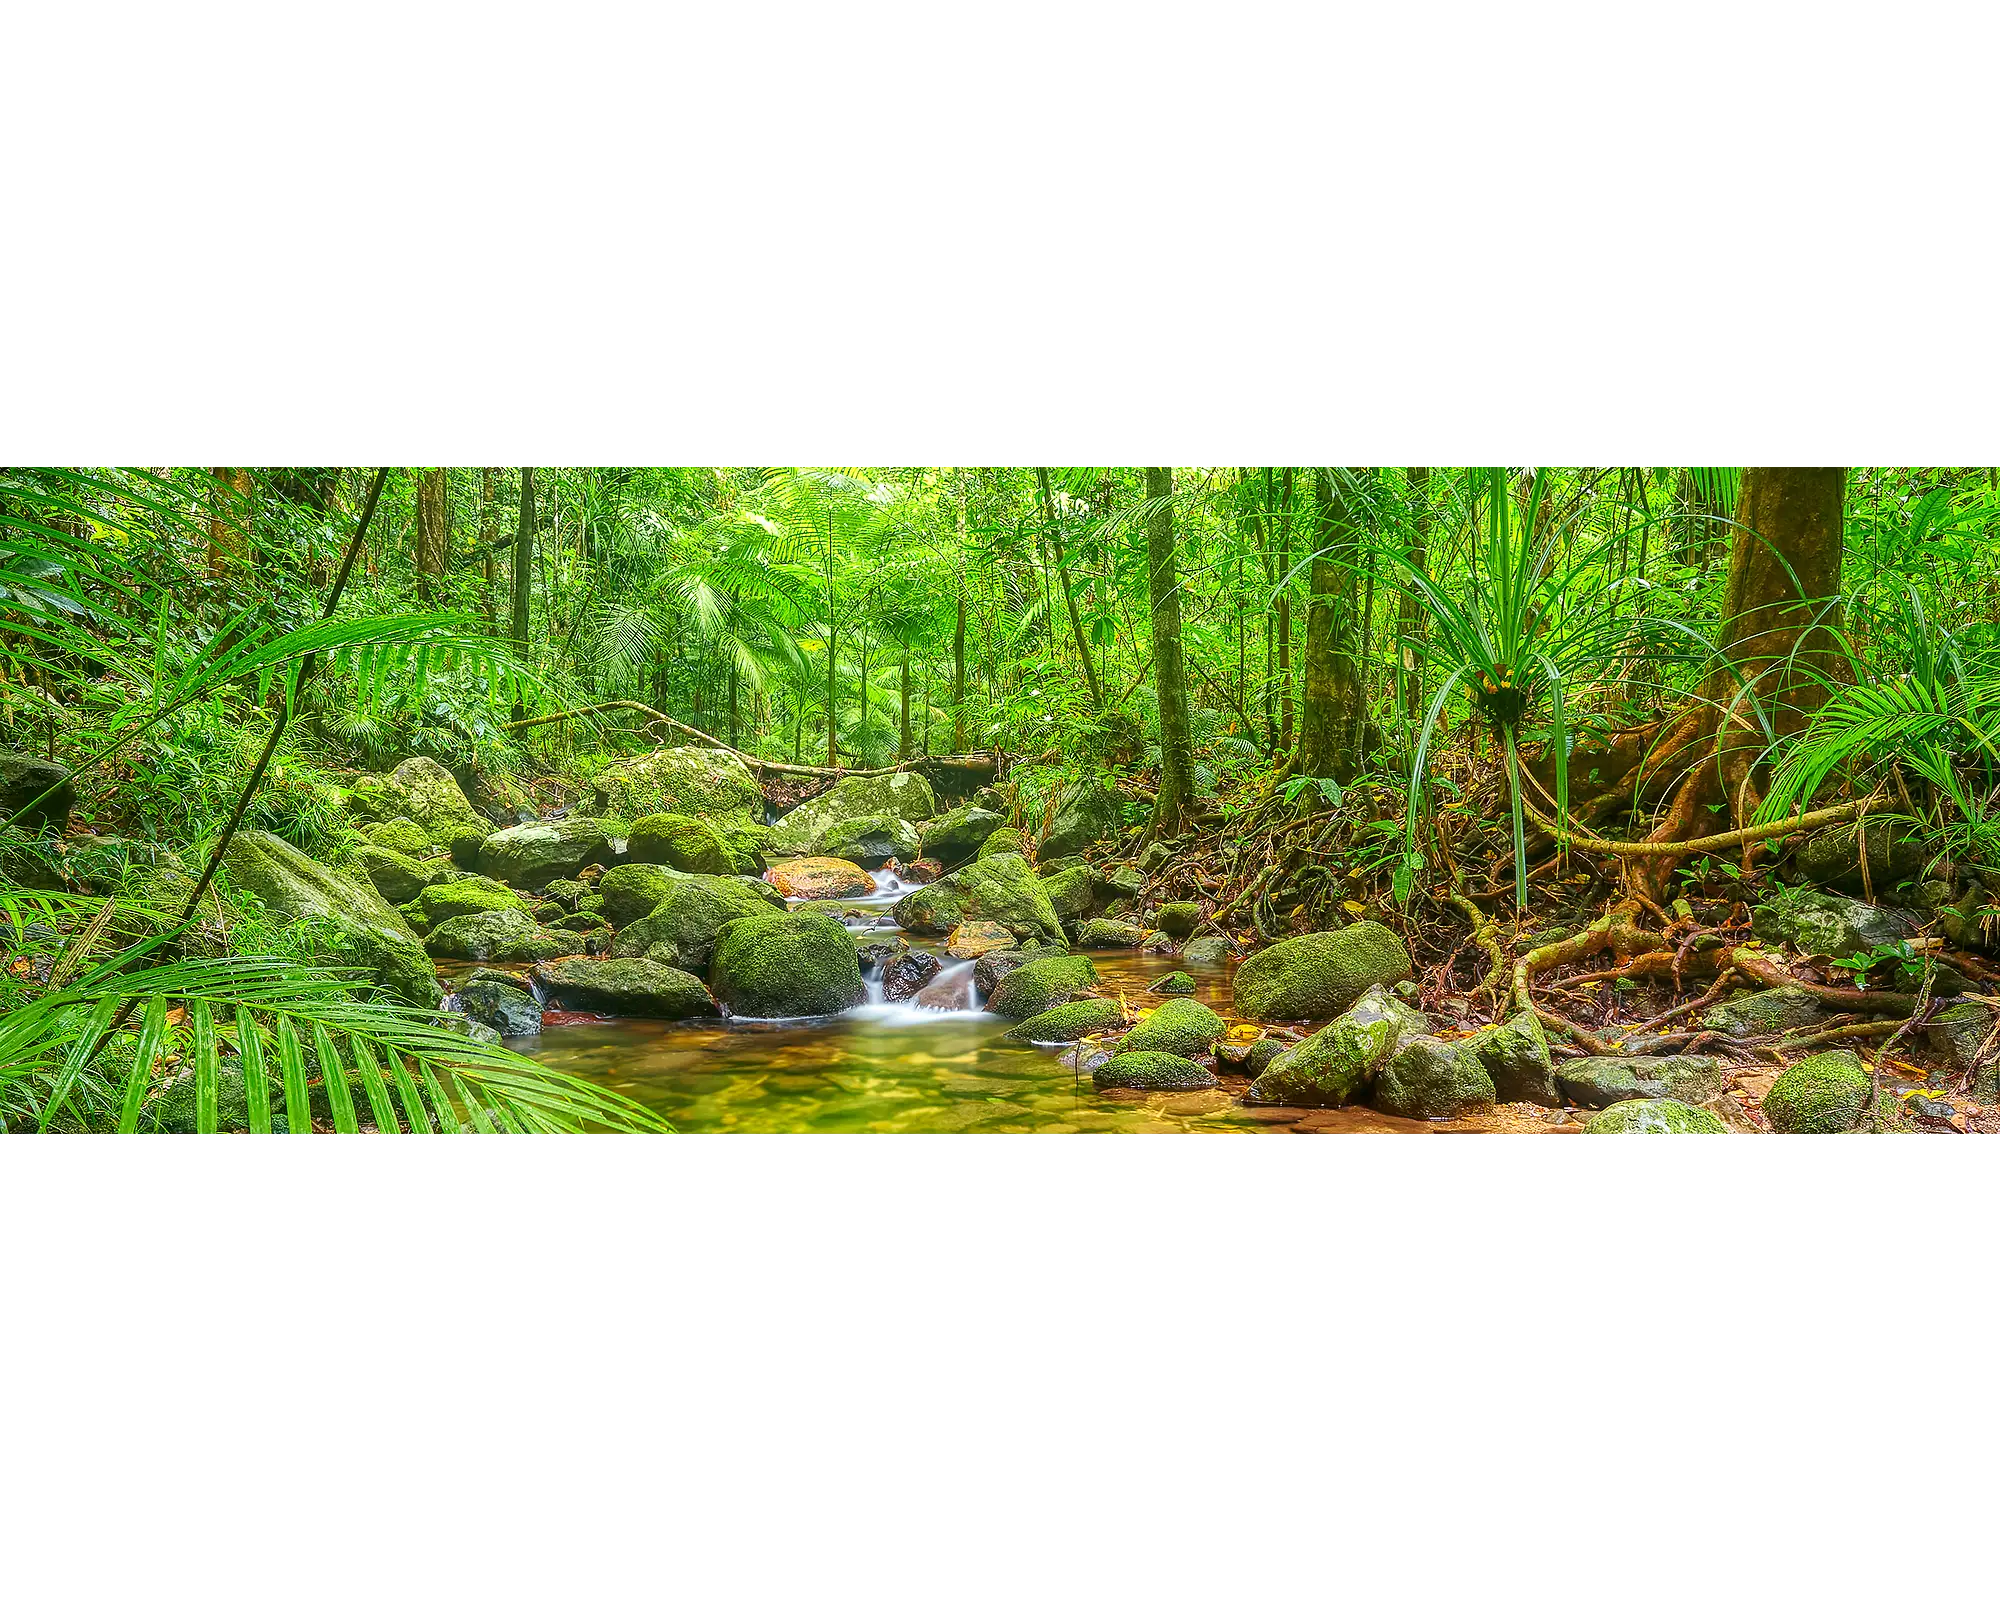 Daintree Tranquility. Creek in lush green forest, Daintree, Queensland.